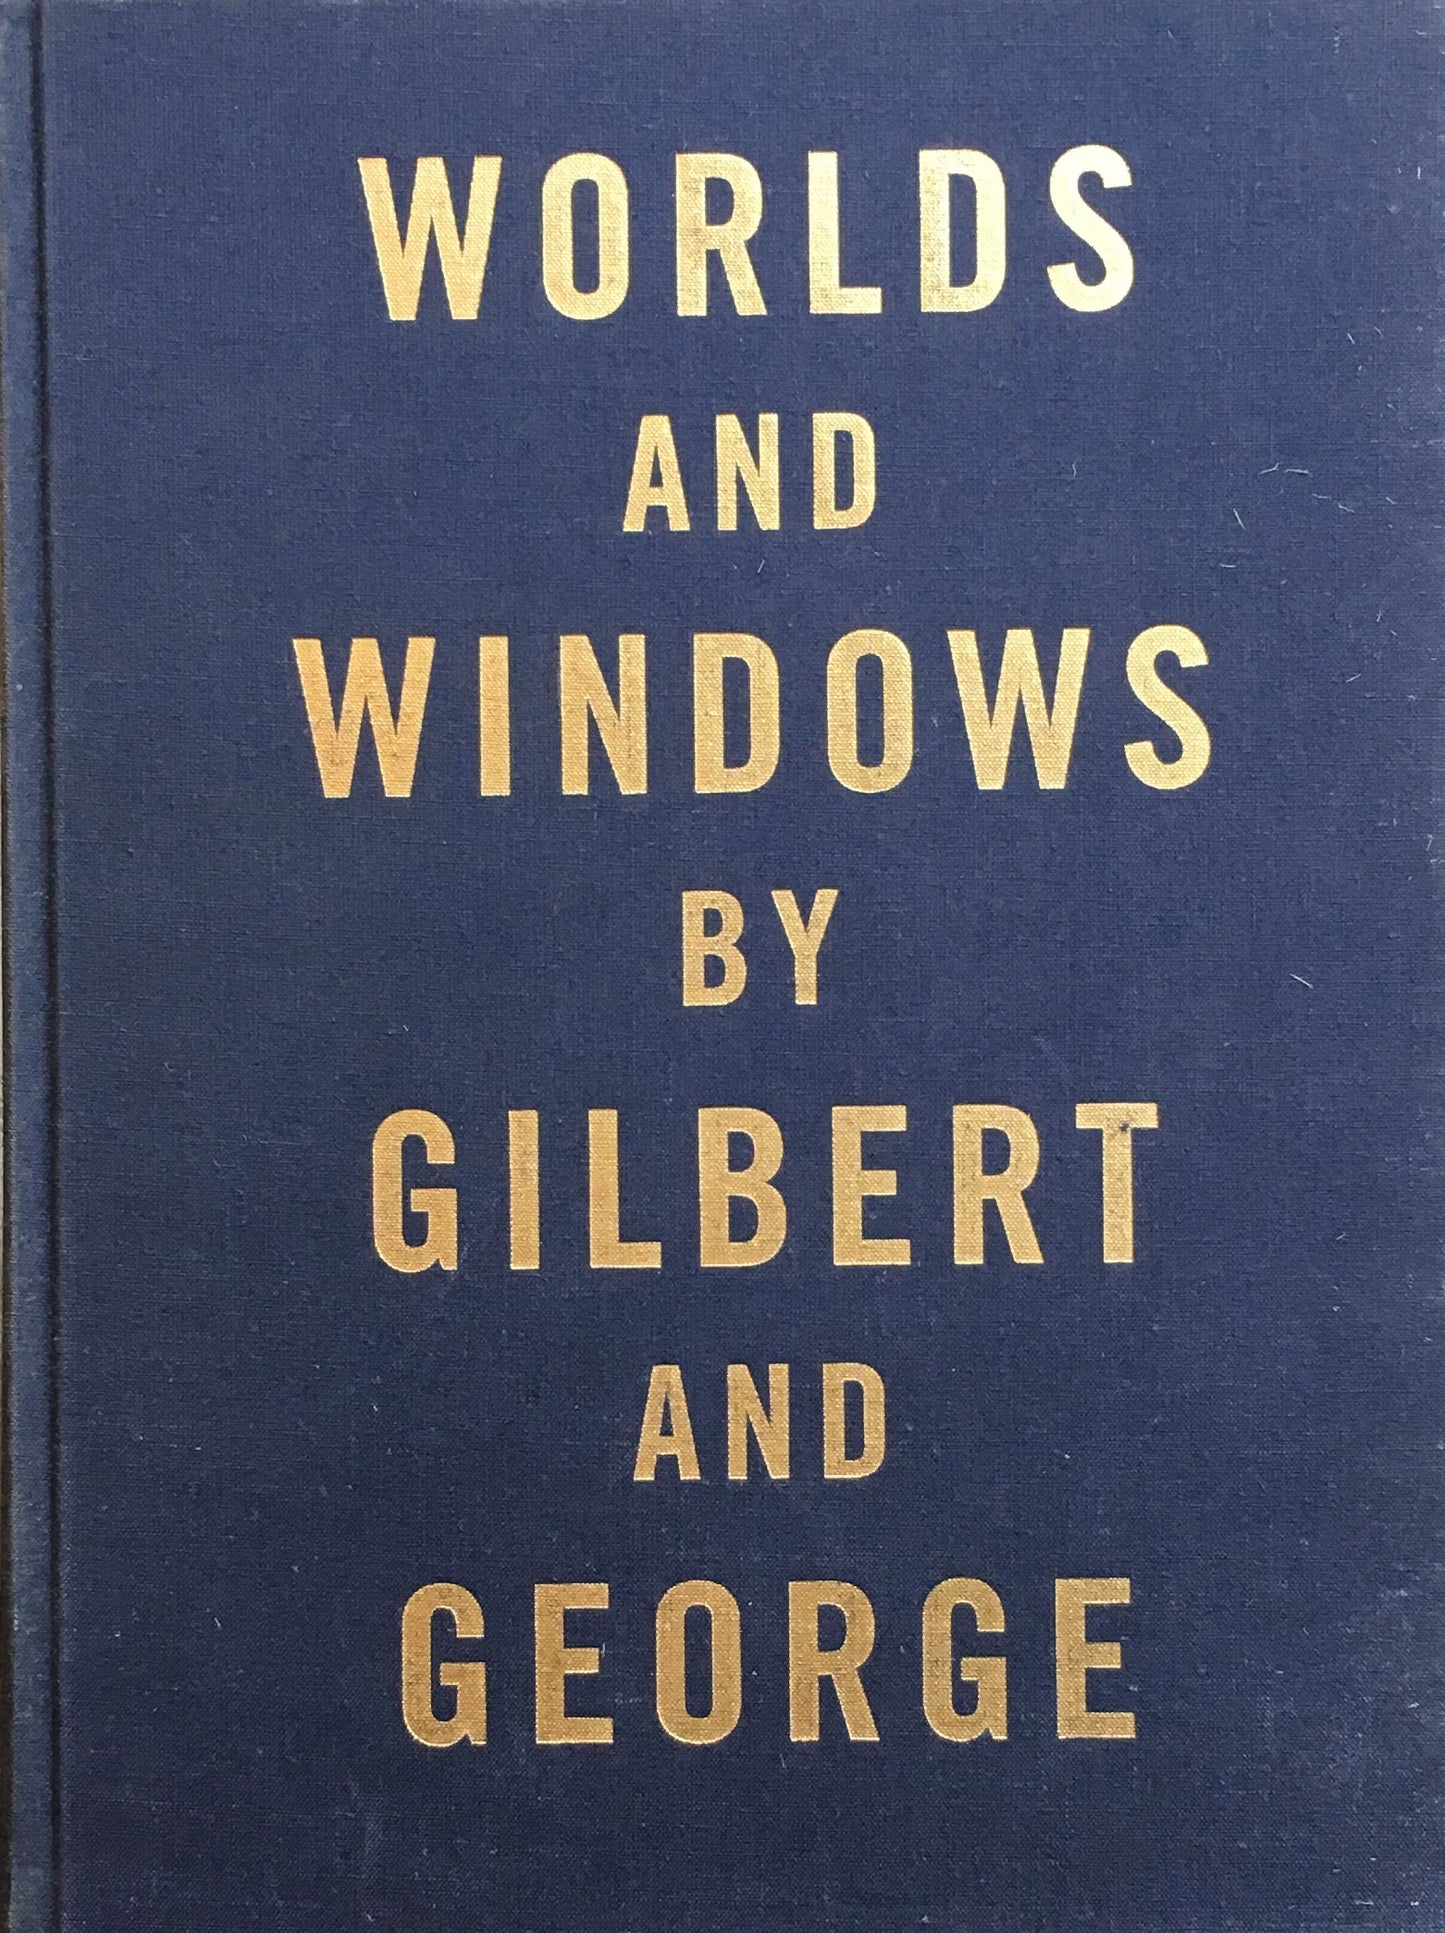 WORLDS AND WINDOWS BY GILBERT AND GEORGE　ギルバート＆ジョージ